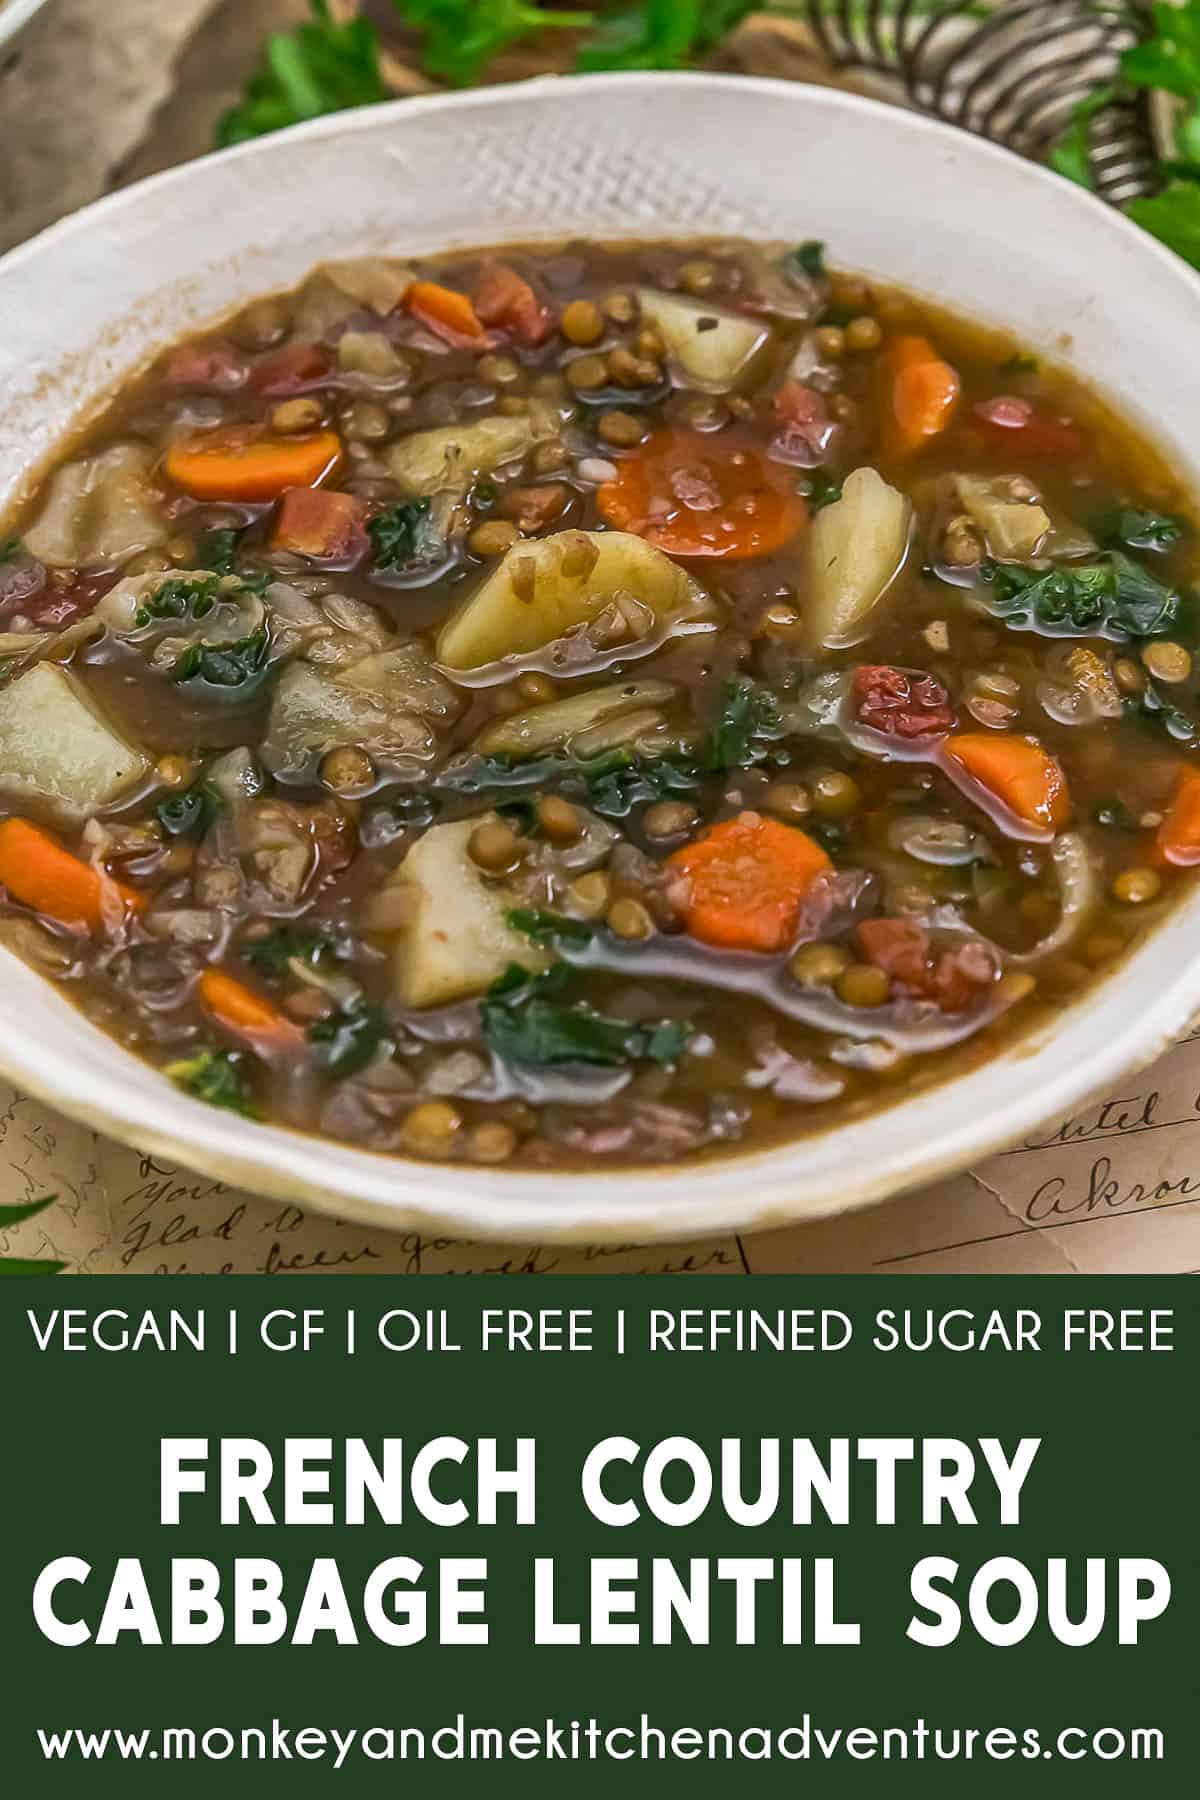 French Country Cabbage Lentil Soup with text description